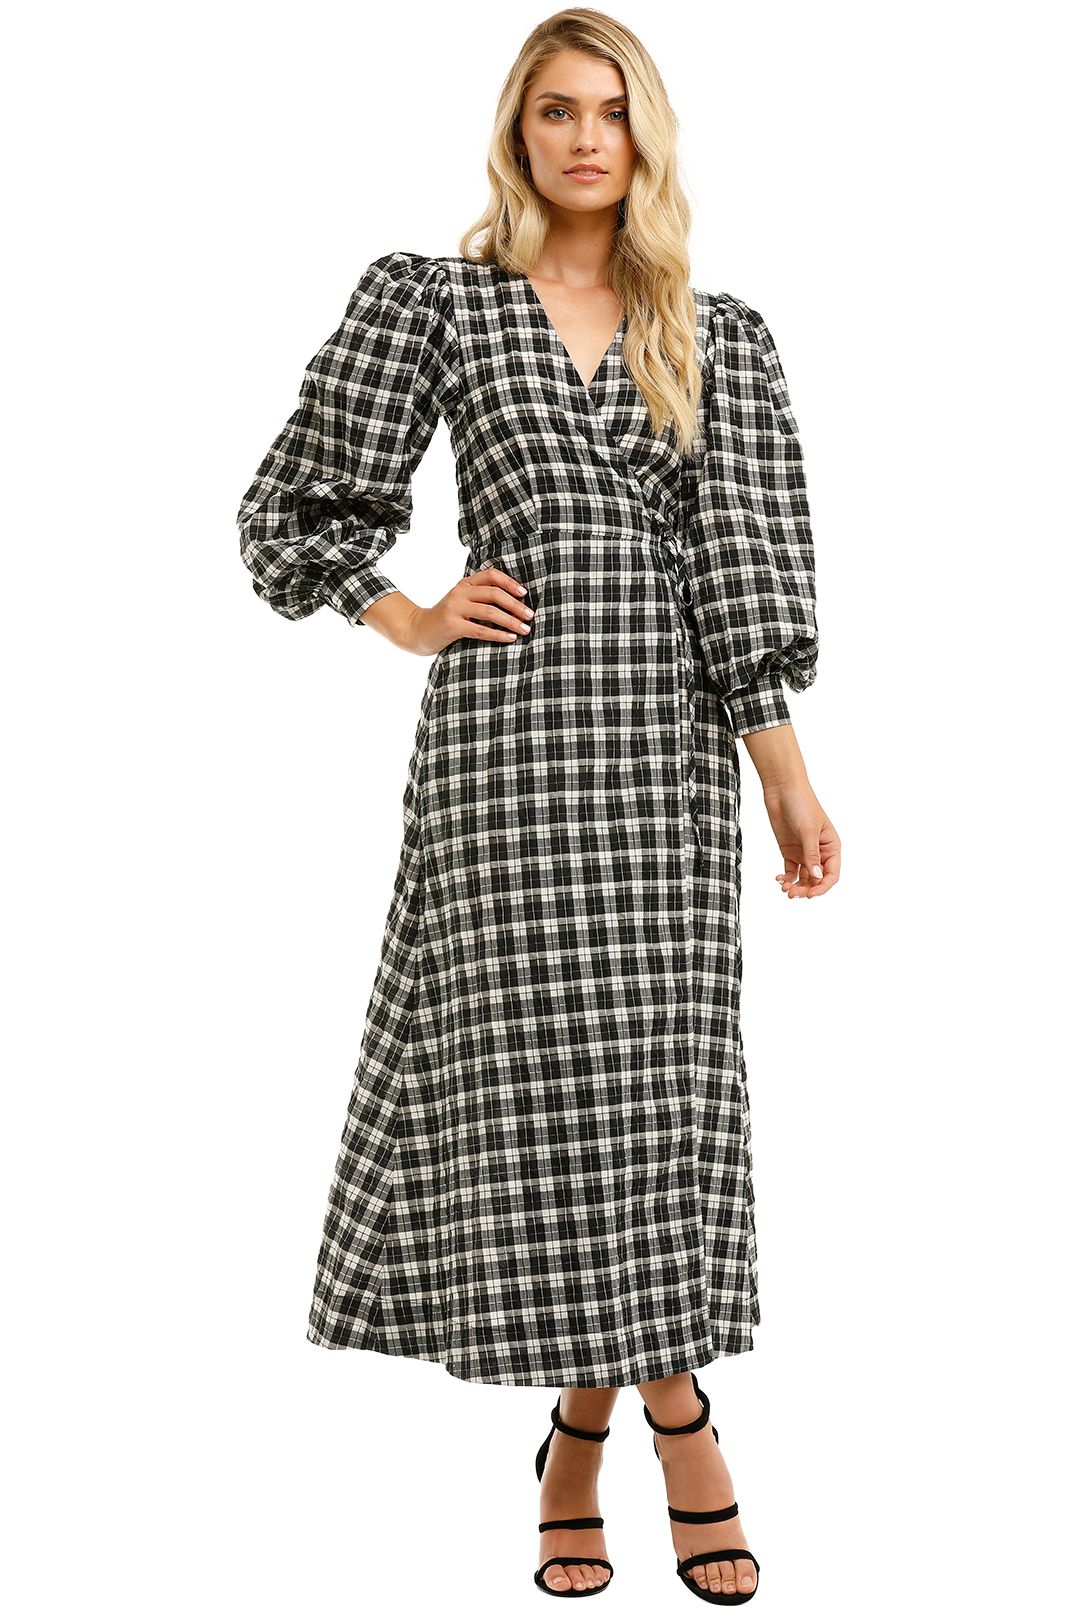 Ganni-Check-Long-Sleeves-Wrap-Dress-Front